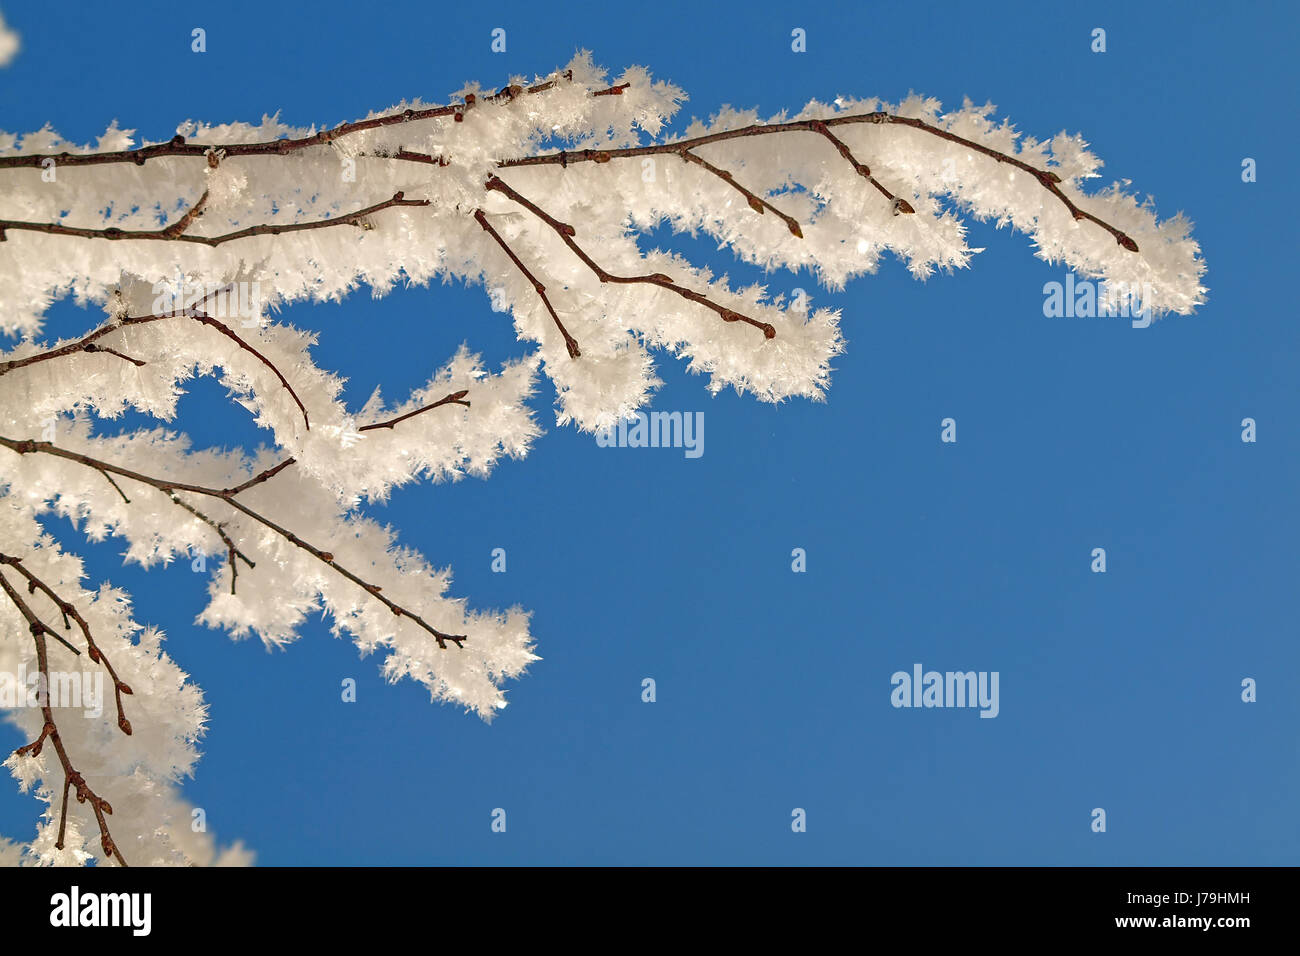 tree,winter,cold,ice,branch,snow,tree,winter,cold,ice,branch,crystal,snow Stock Photo